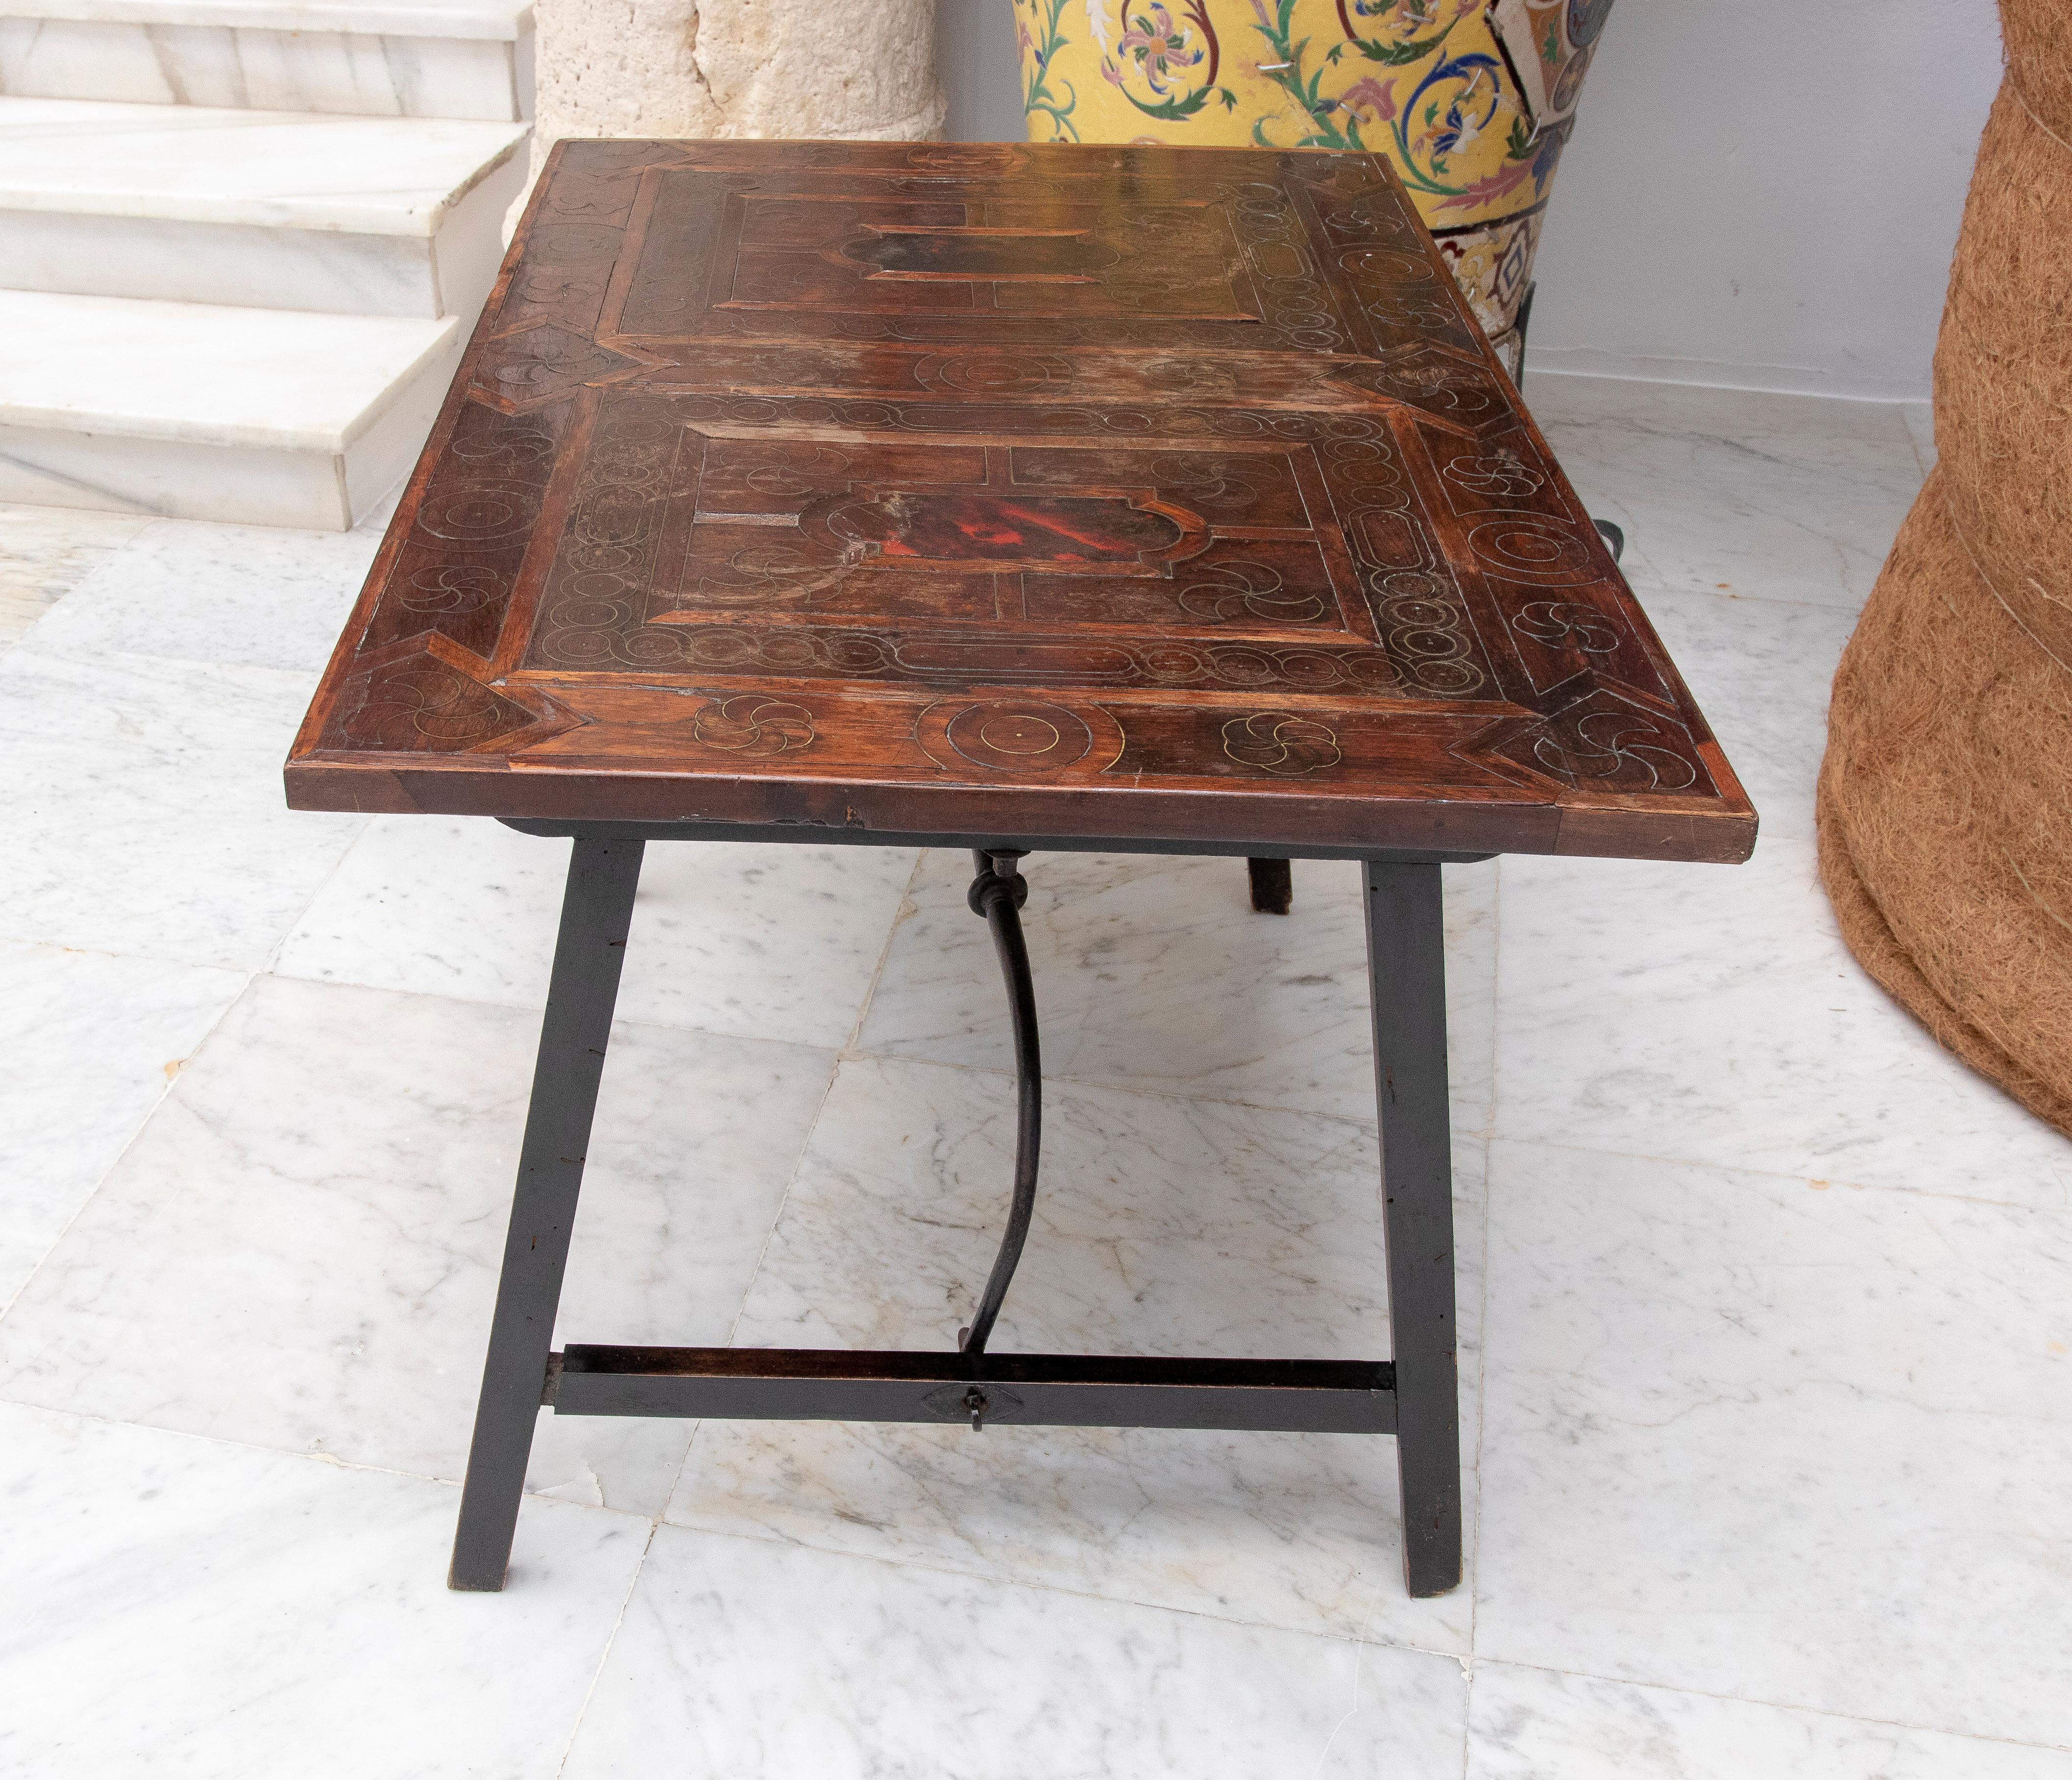 18th Century and Earlier 17th Century Spanish Wooden Table with Inlays